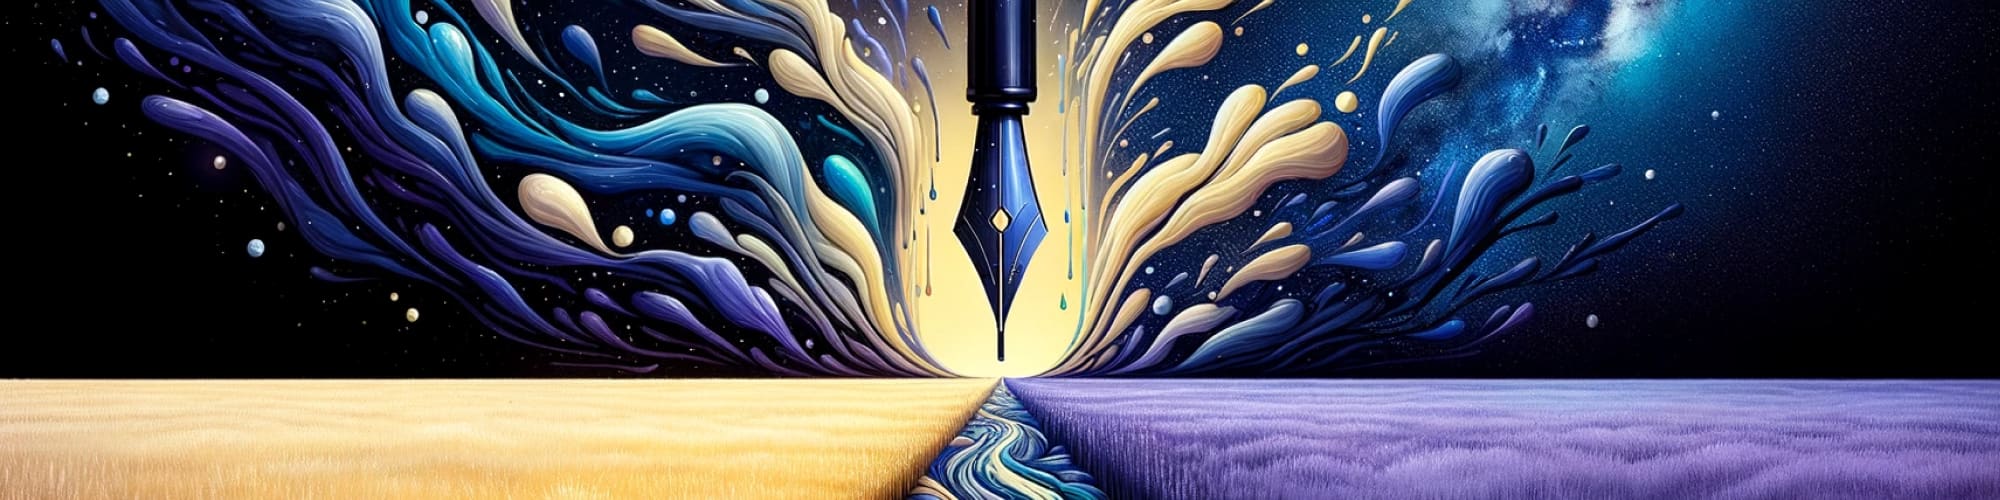 Artistic image of a ink pen